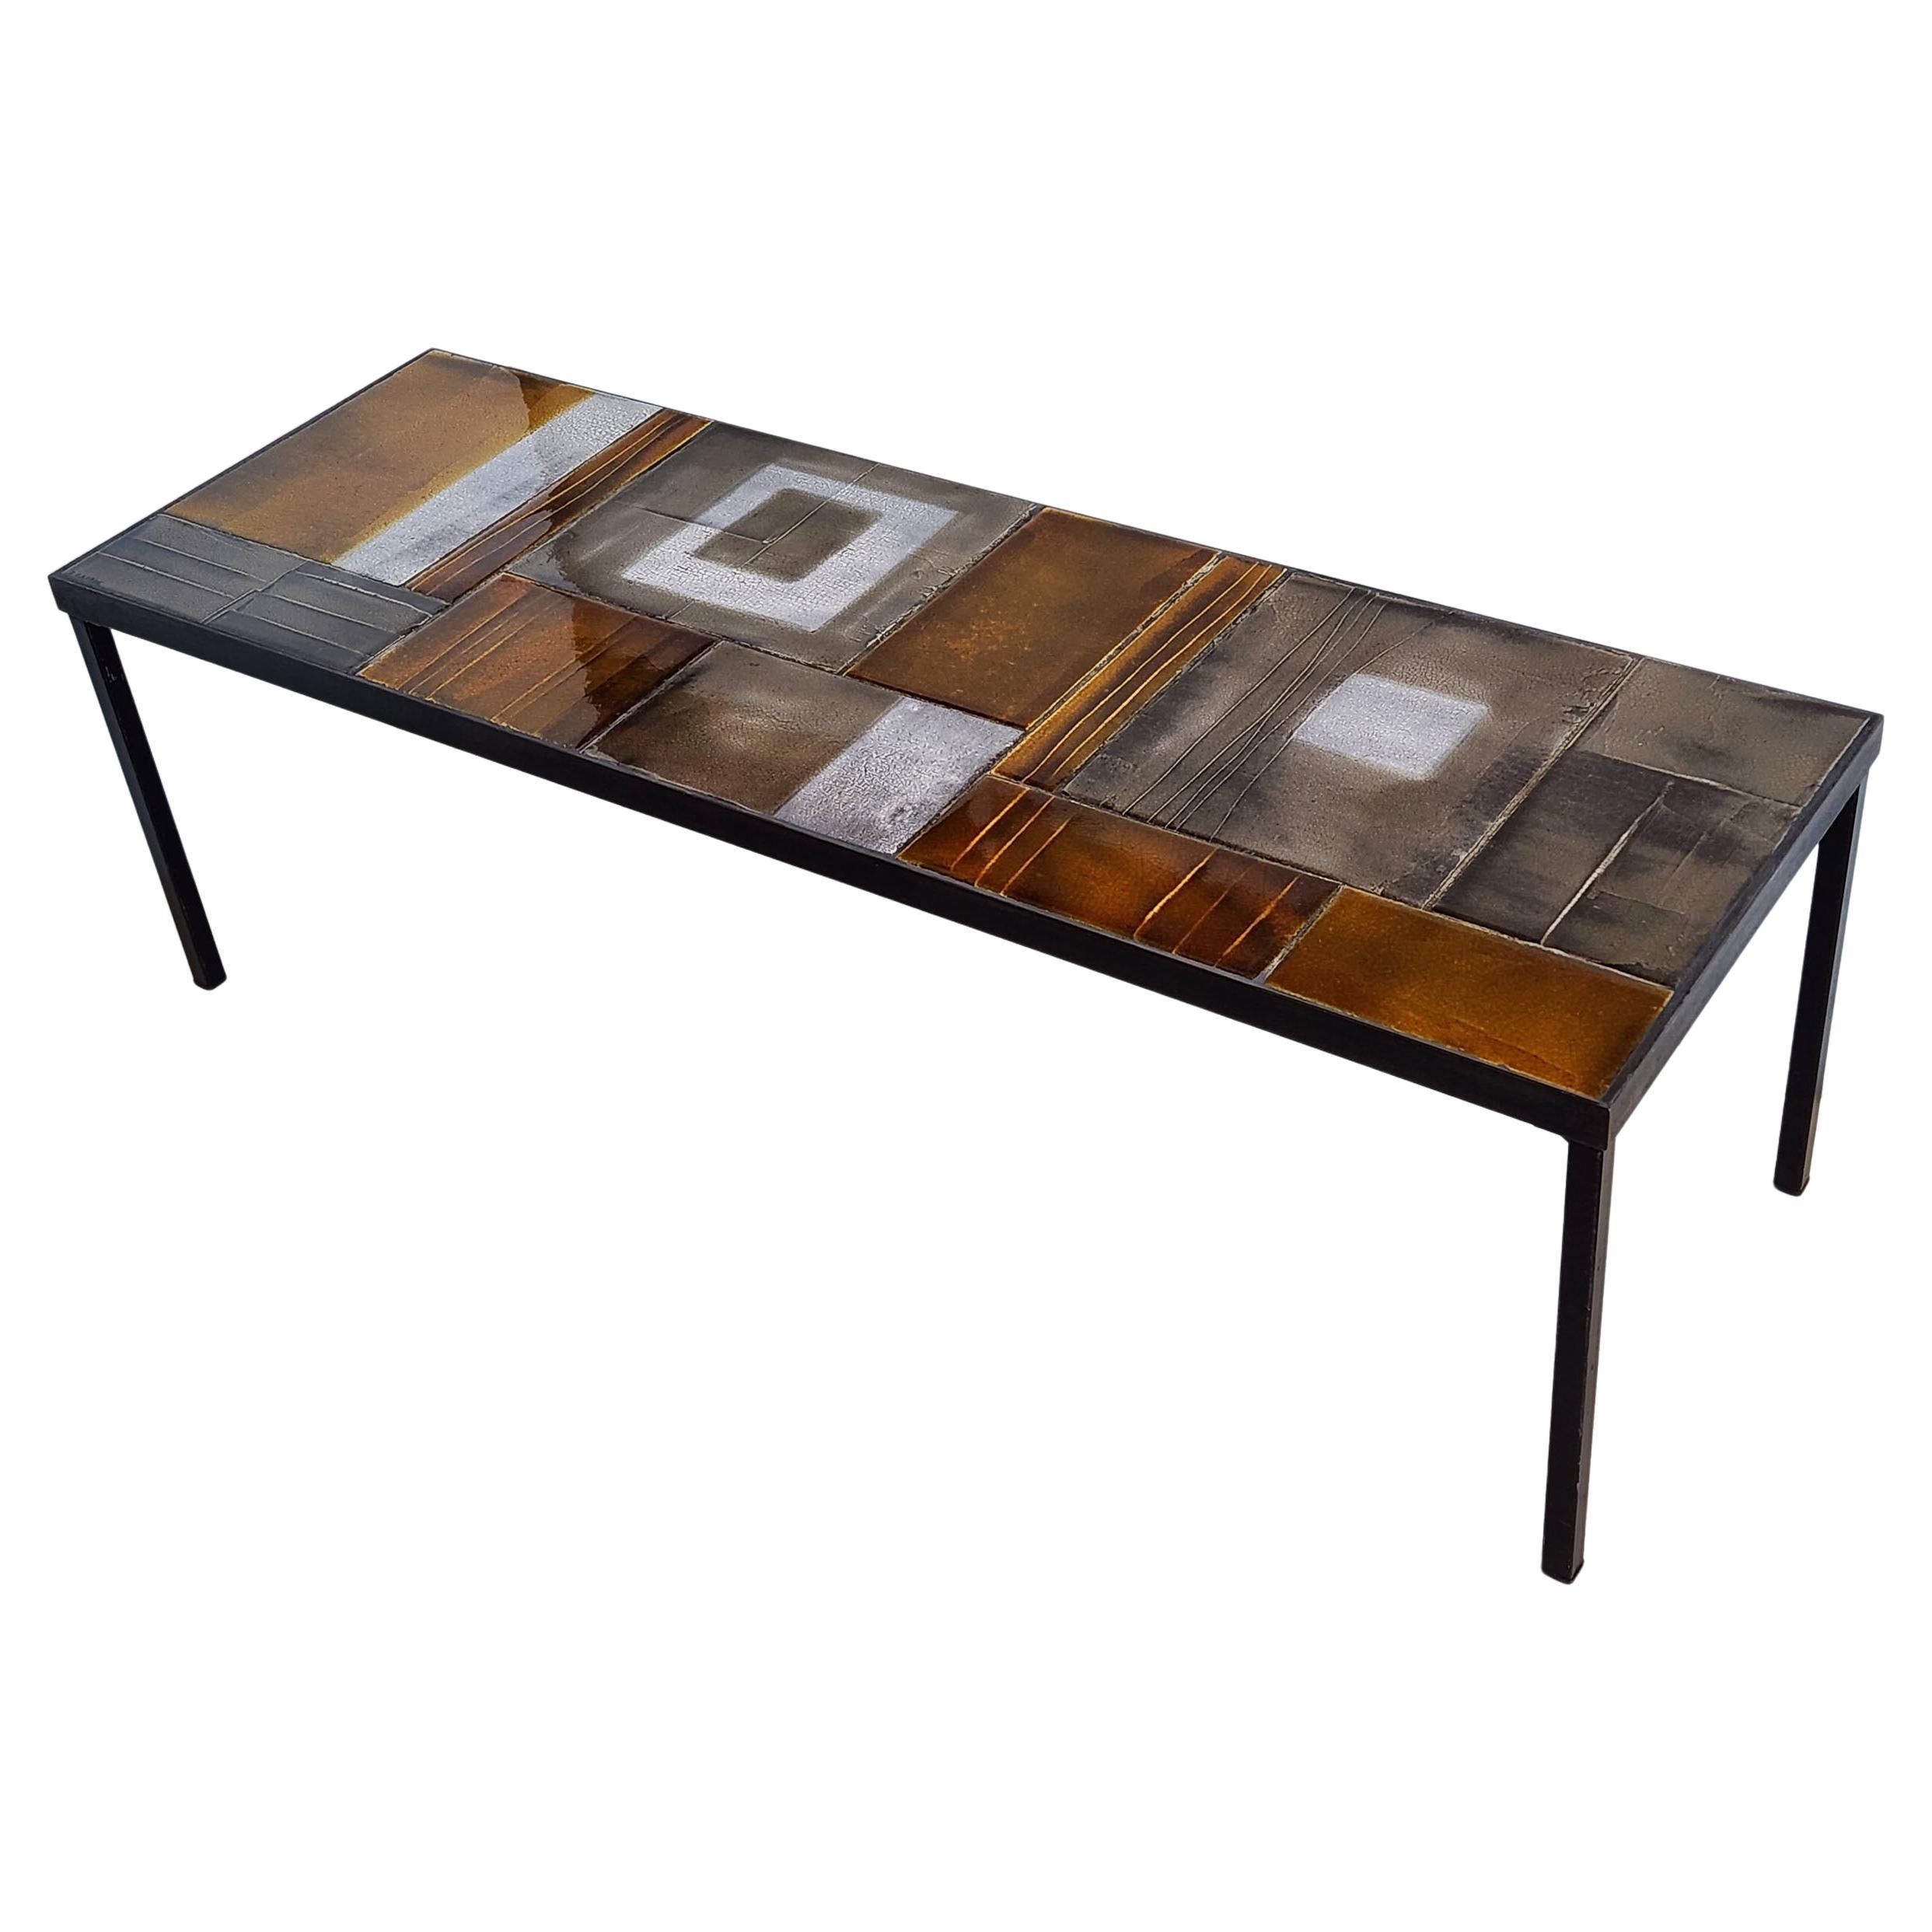 Roger Capron - Stunning Ceramic Coffee Table with Lava Tiles, Metal Frame, 1970s For Sale